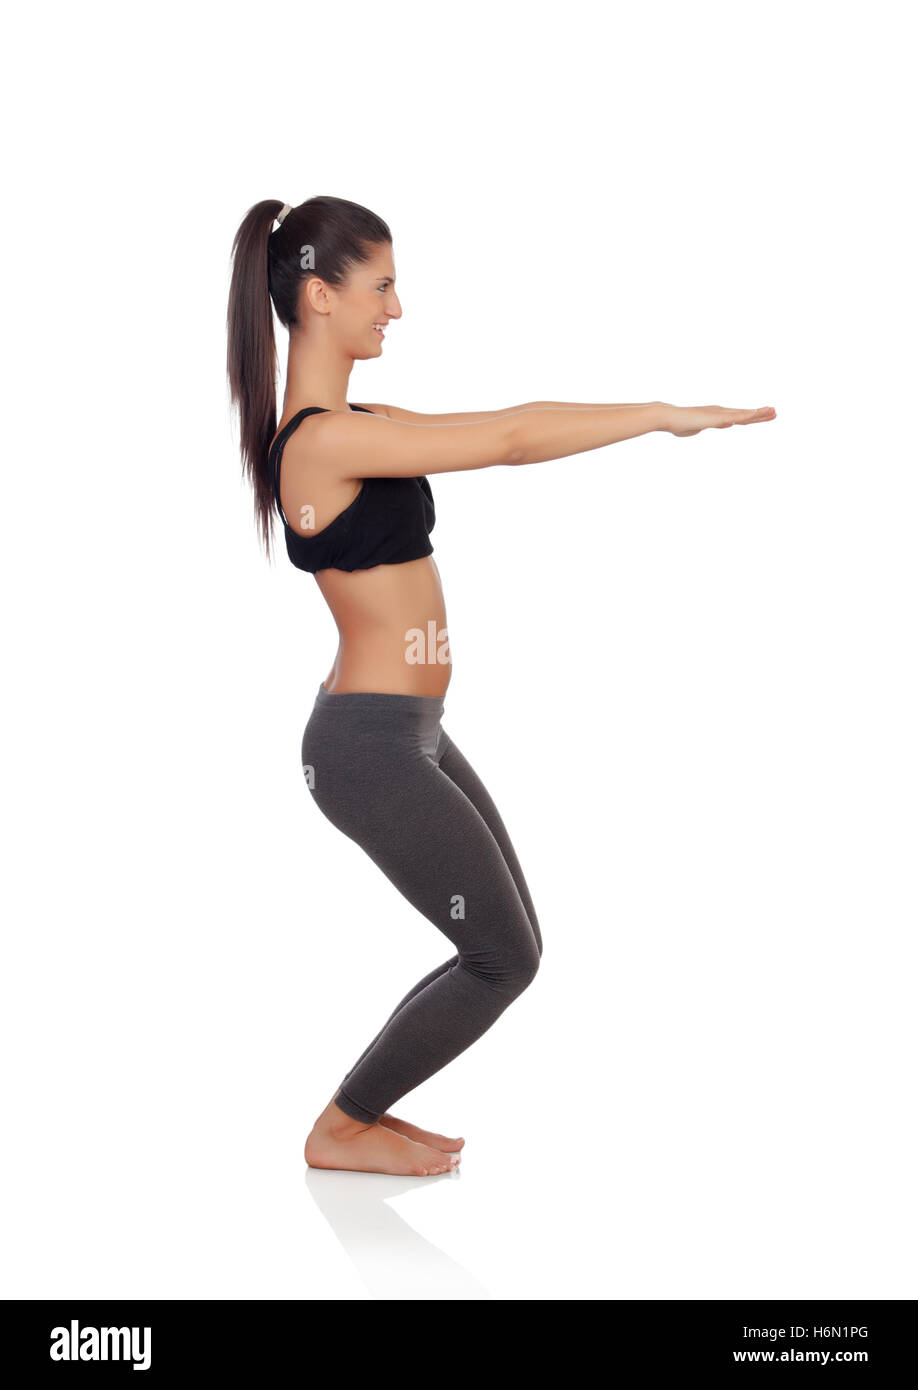 Woman doing exercises isolated on a white background Stock Photo